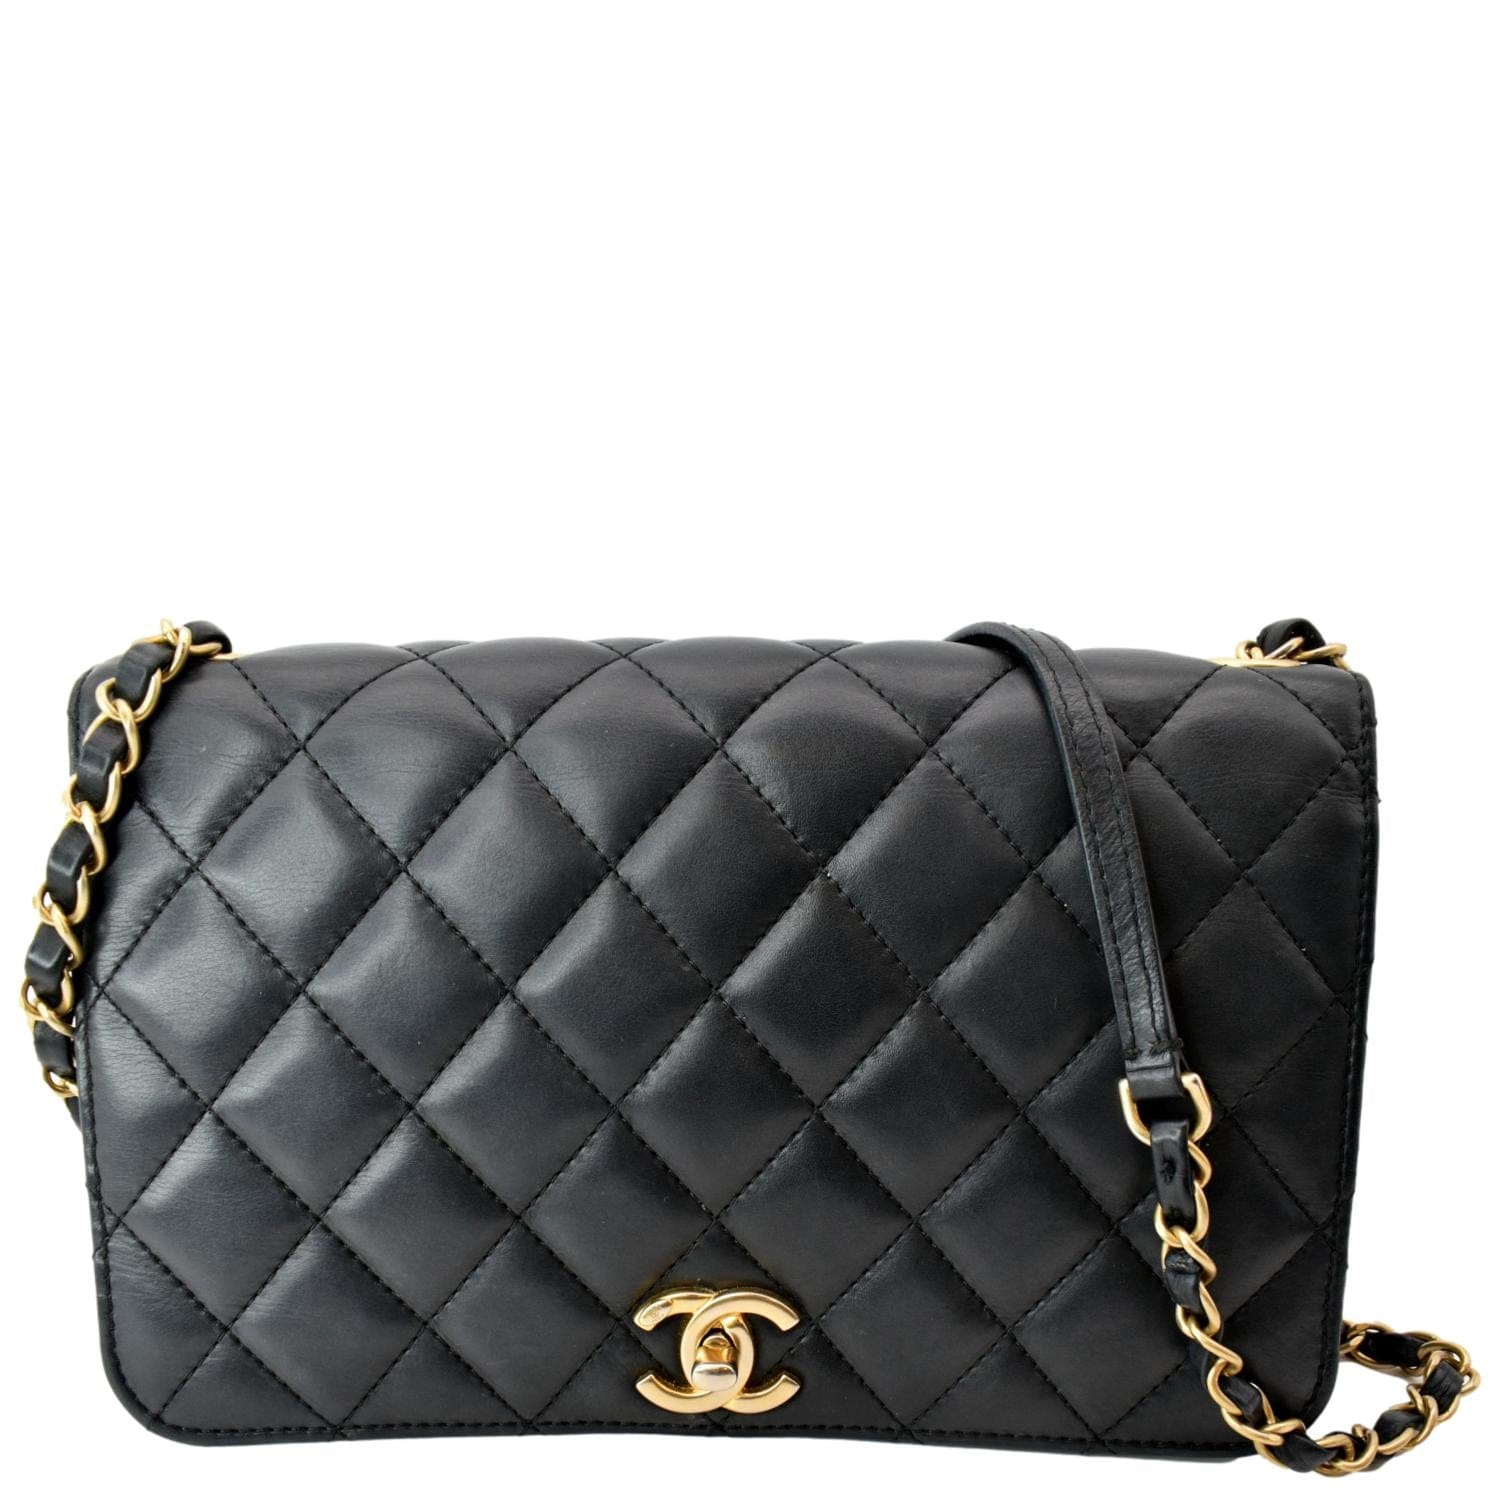 Chanel Black Perforated Leather Expandable Classic Flap Shoulder